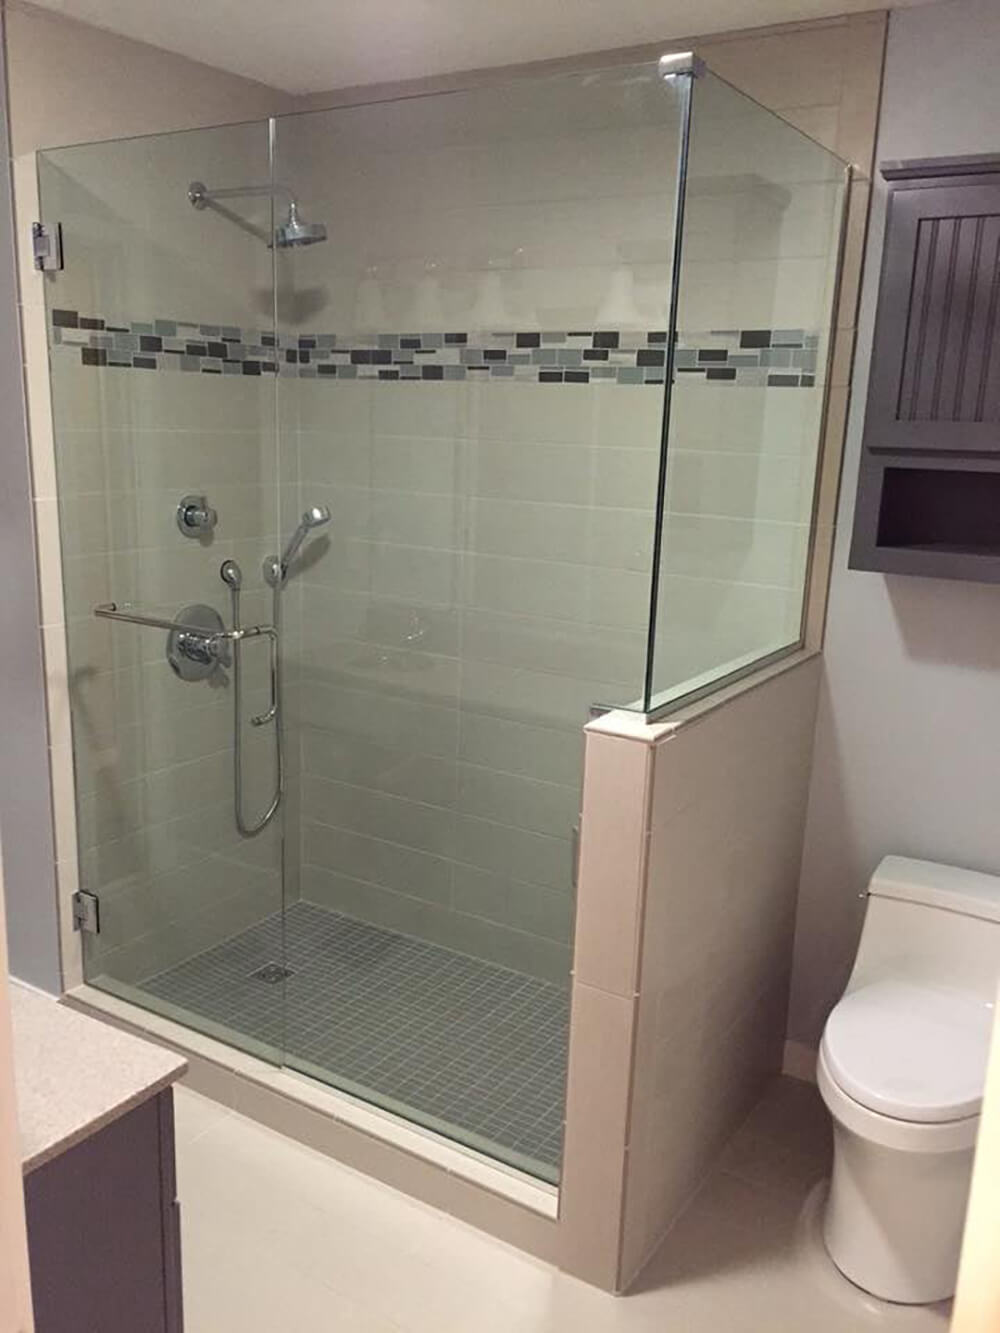 Bathroom Remodeling Project #4 - The Meridian Company